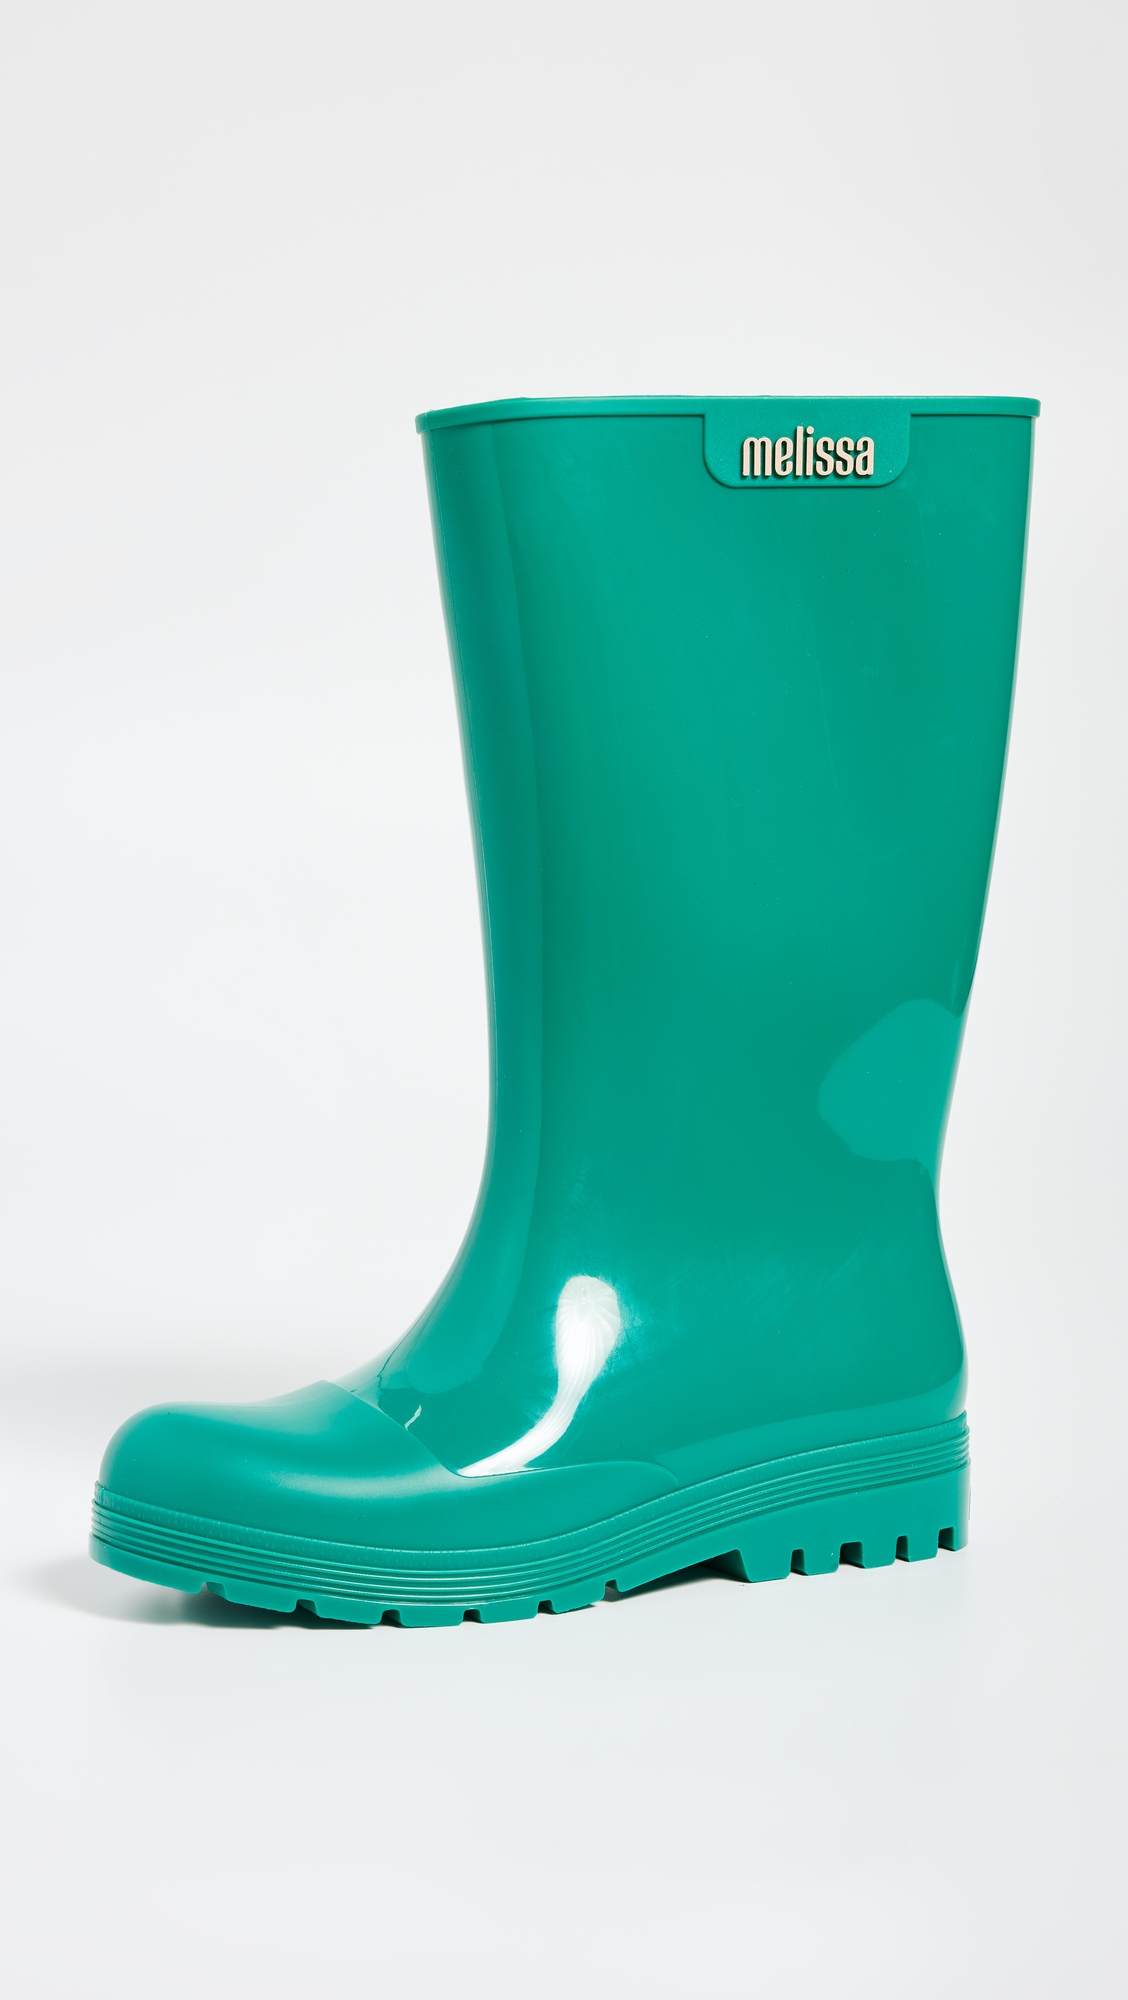 The Best Rain Boots This Season Come From Designer Labels - Forbes Vetted